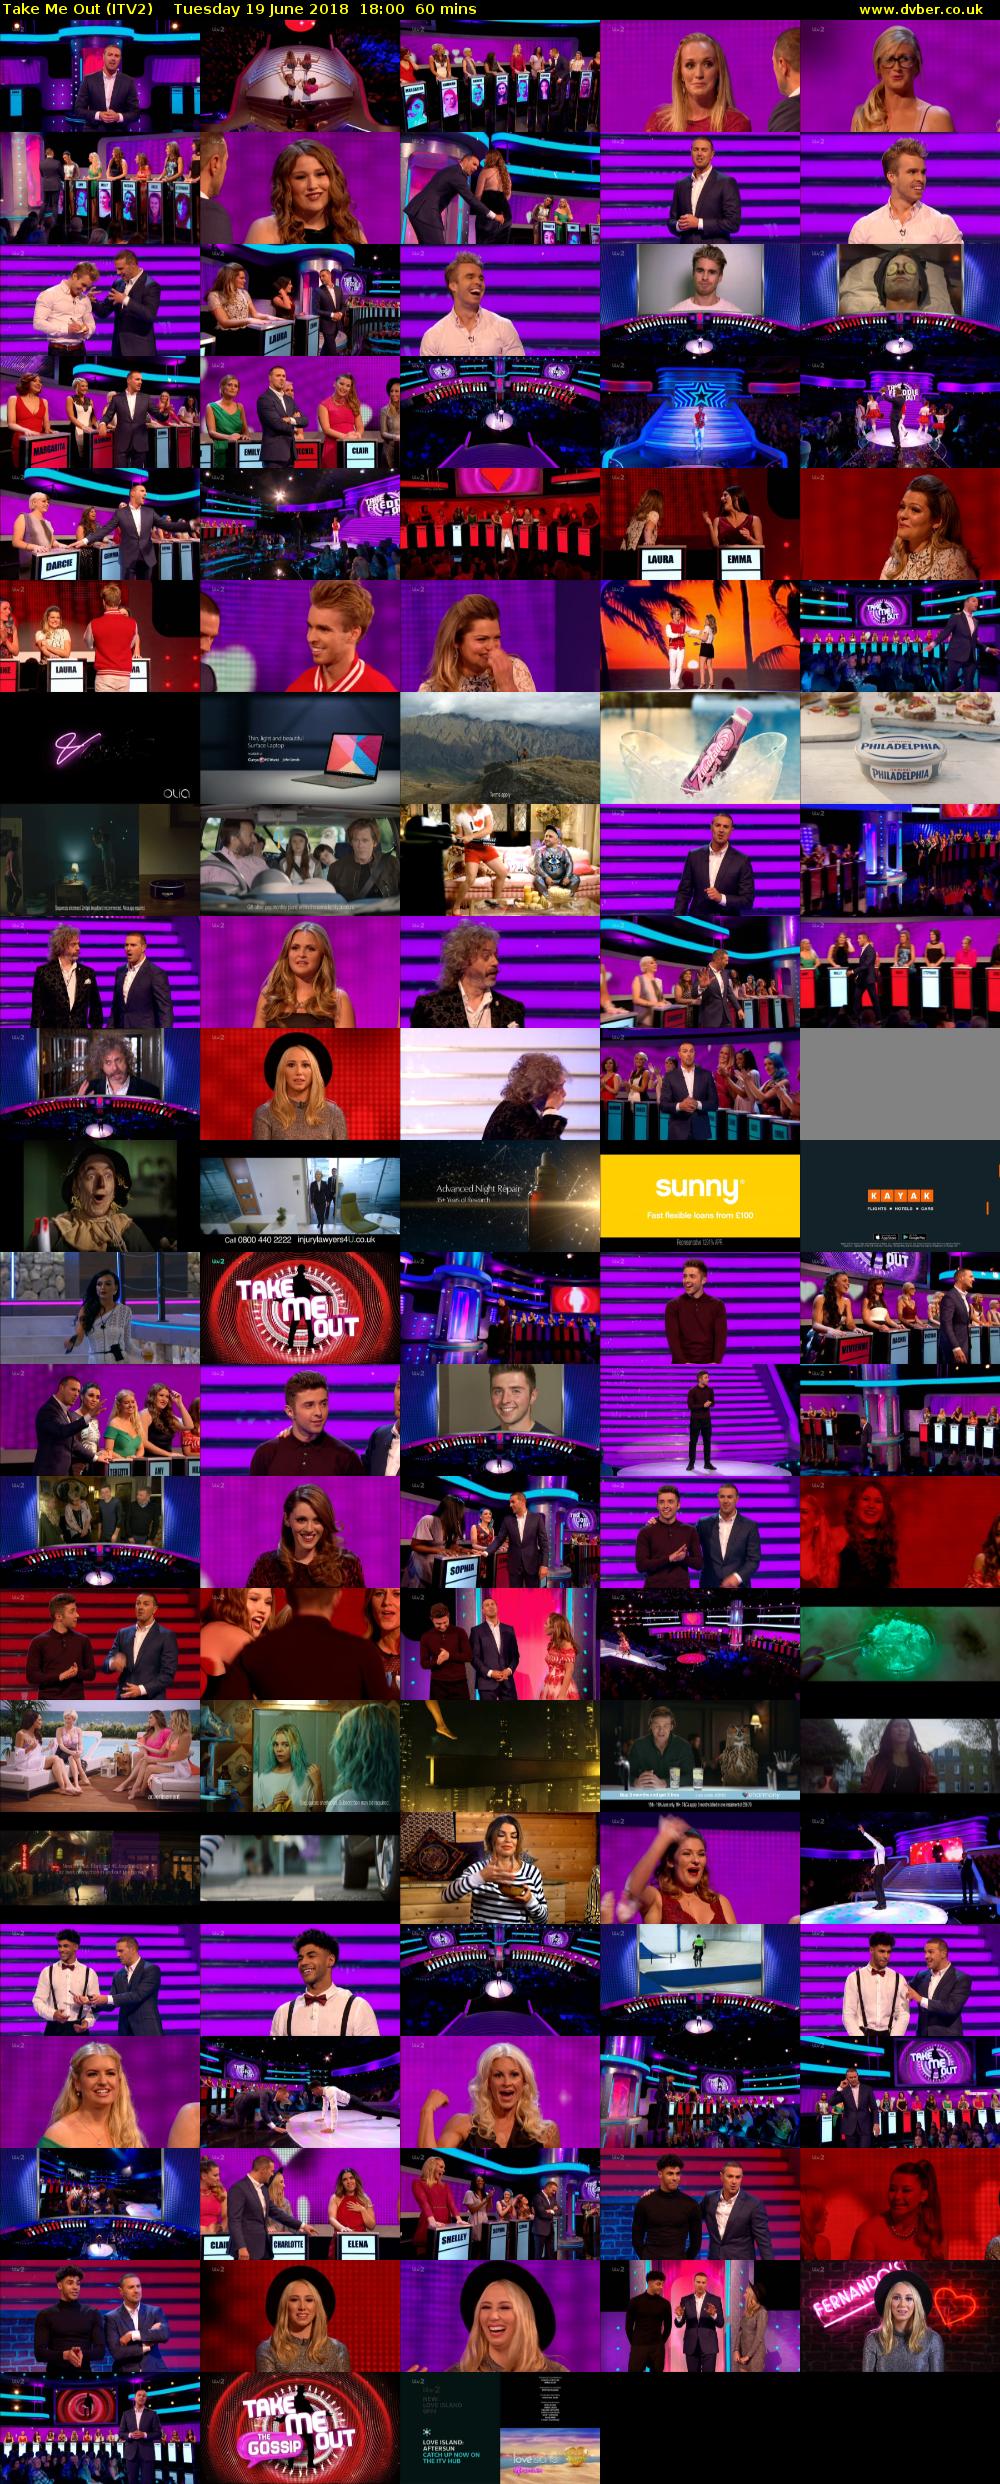 Take Me Out (ITV2) Tuesday 19 June 2018 18:00 - 19:00